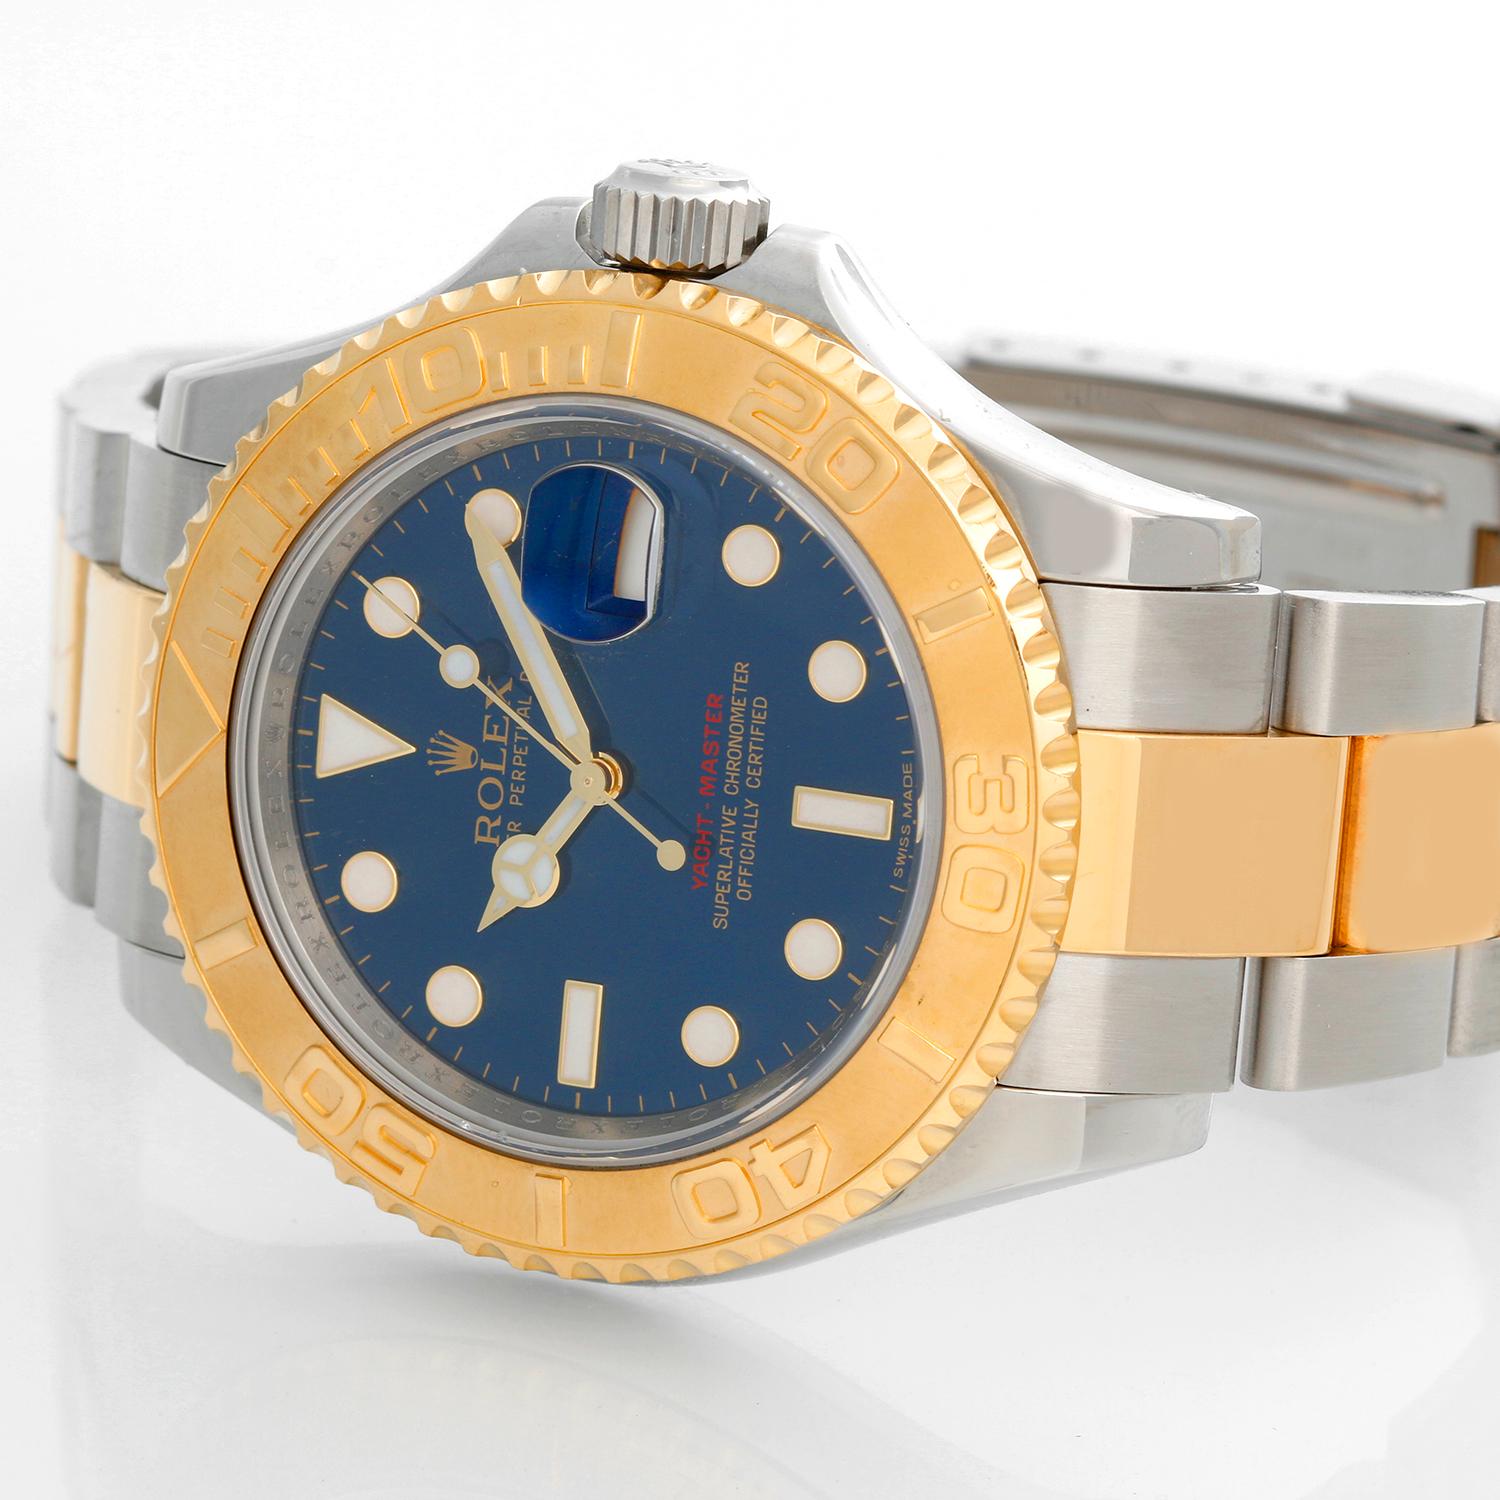 Rolex Yacht-Master Steel & Gold Men's 2-Tone Watch 16623 - Automatic winding, 31 jewels, Quickset, sapphire crystal. Stainless steel case with 18k yellow gold bezel  (40mm diameter). Factory Blue Dial. Stainless steel and 18k yellow gold Oyster